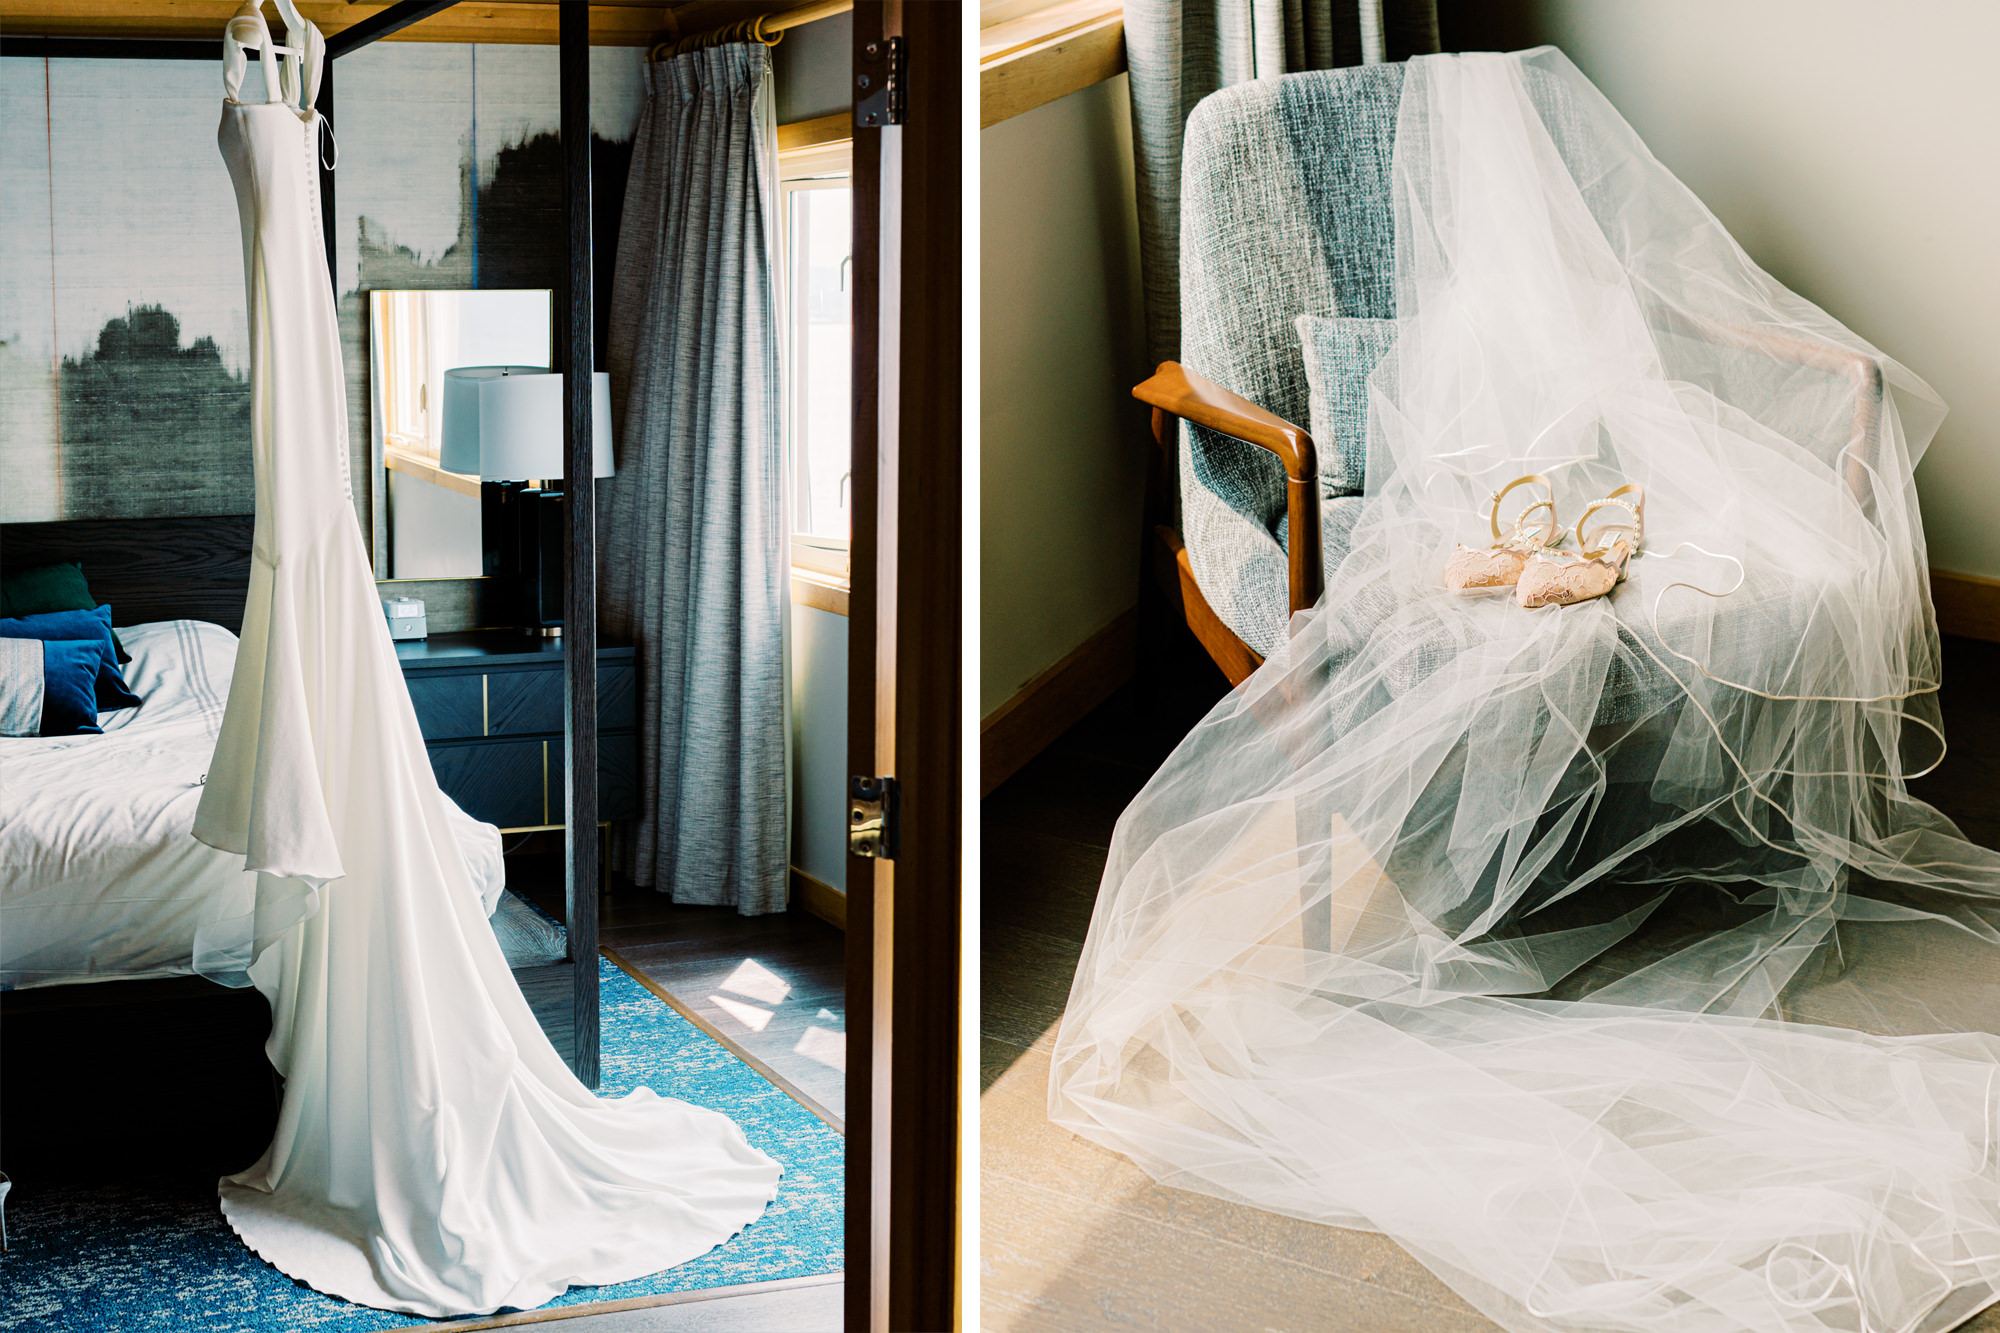 The Edgewater Hotel Weddings: Tennie's dress, shoes and veil